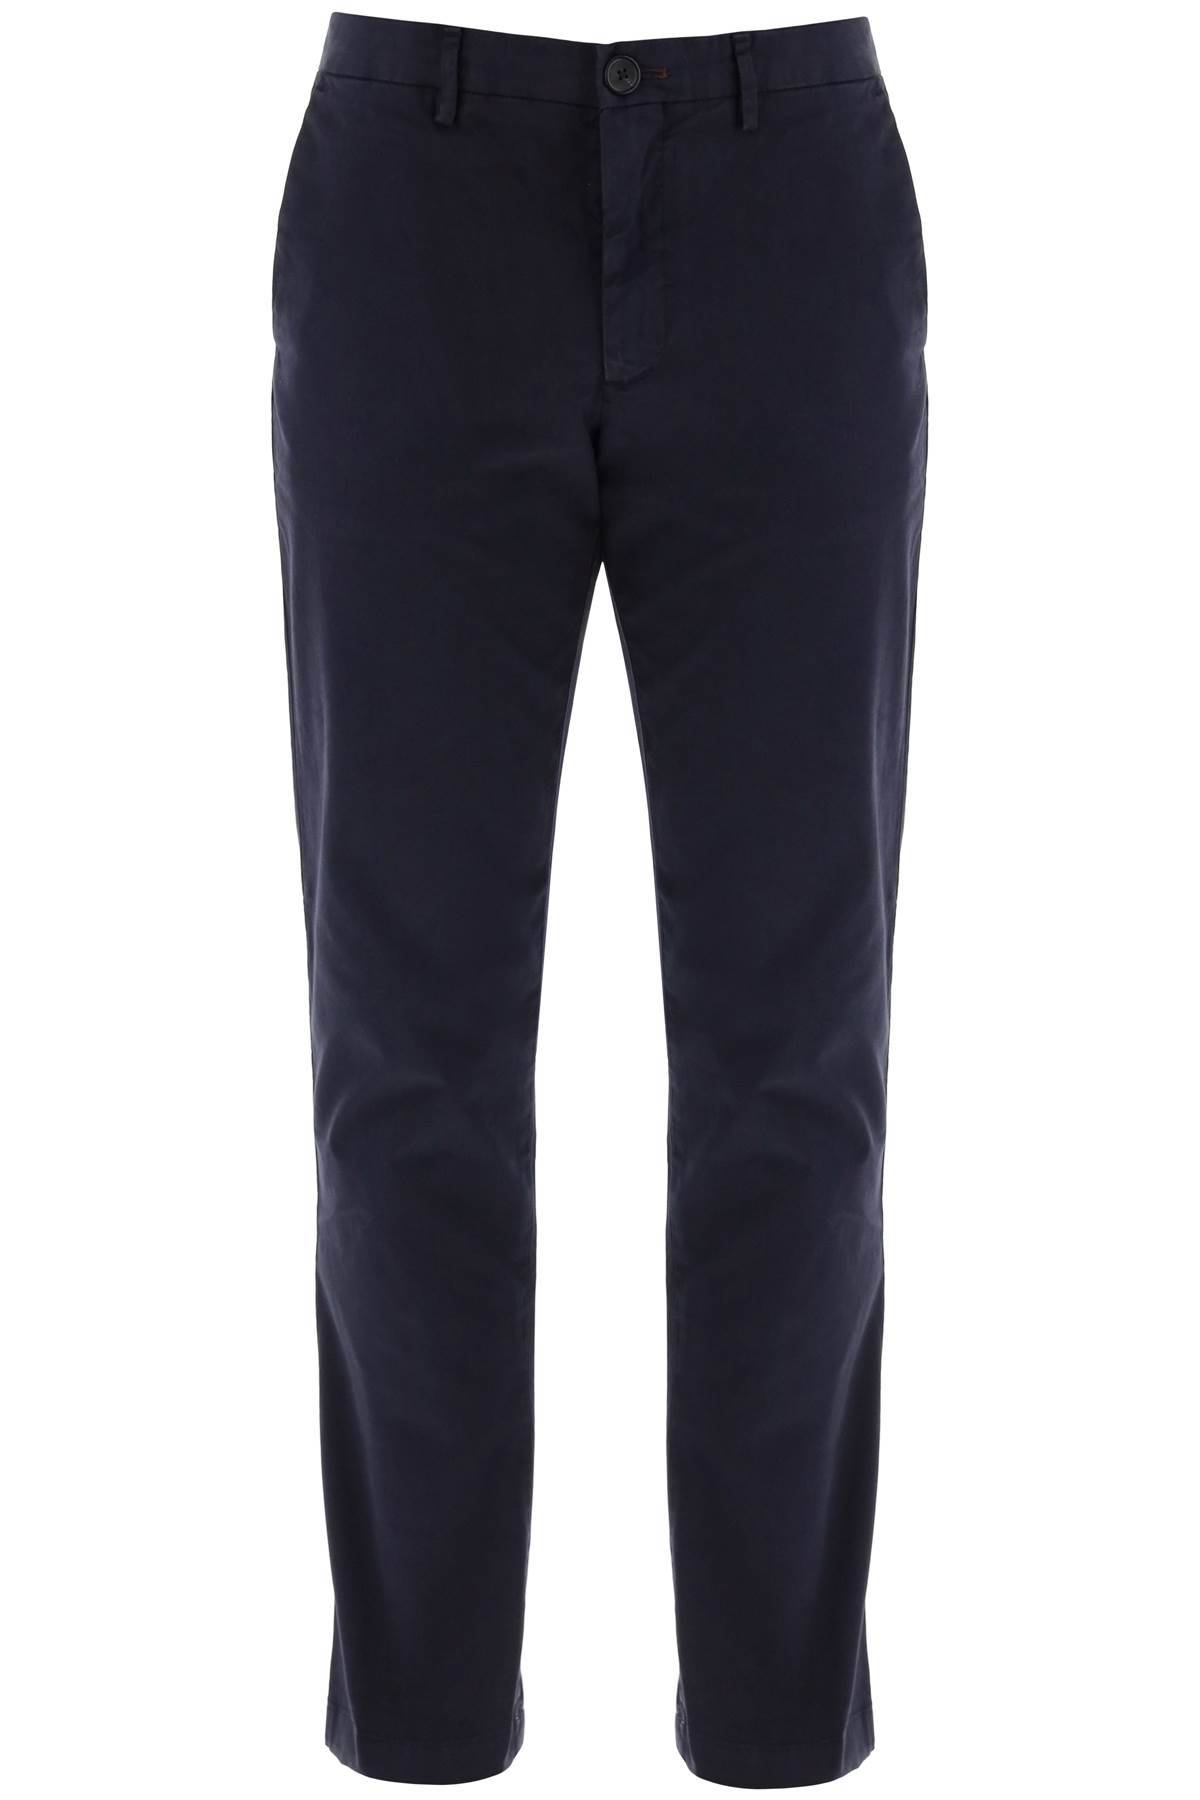 Ps Paul Smith PS PAUL SMITH cotton stretch chino pants for